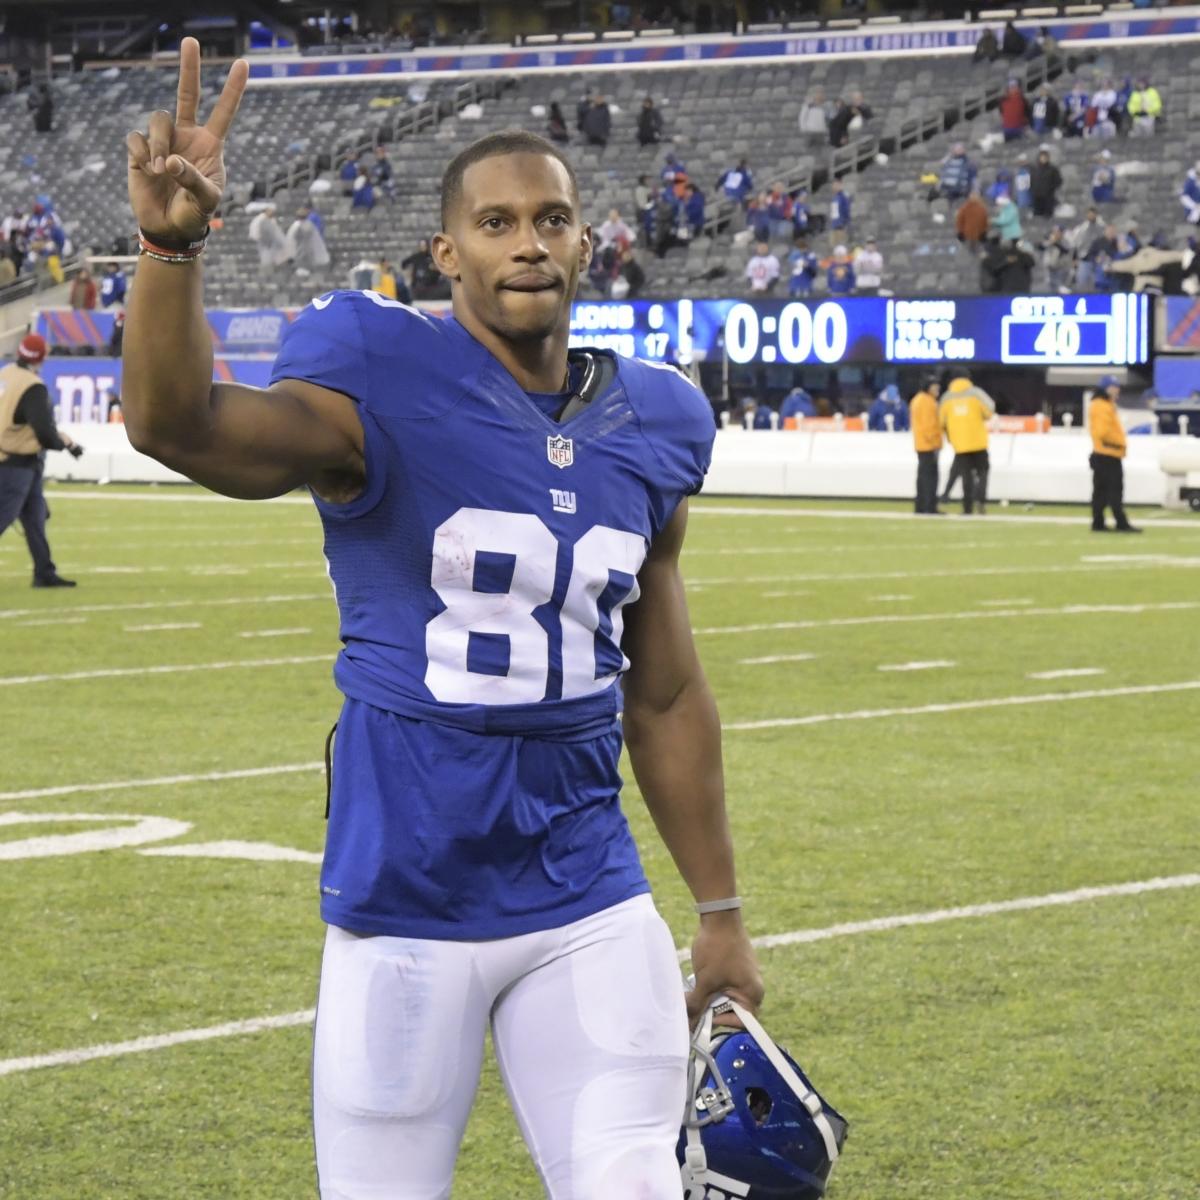 The Titan Video games 2020 Outcomes: Ex-Giants WR Victor Cruz Defeated in West Enviornment